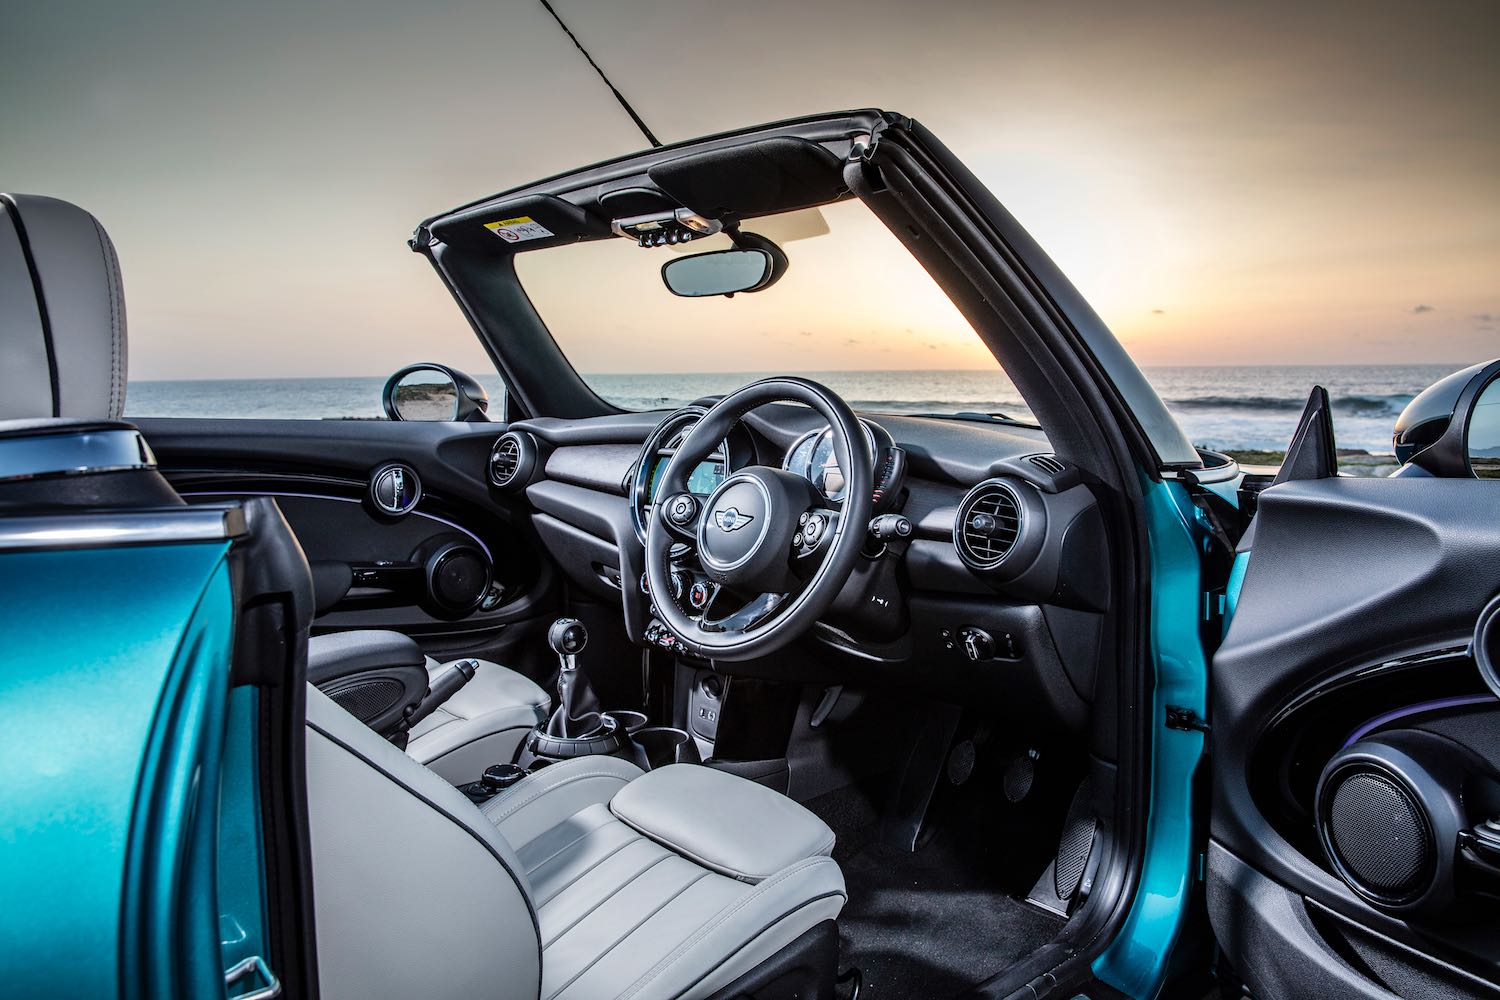 Neil Lyndon reviews the Best selling open top MINI Cooper Convertible for Drive 6